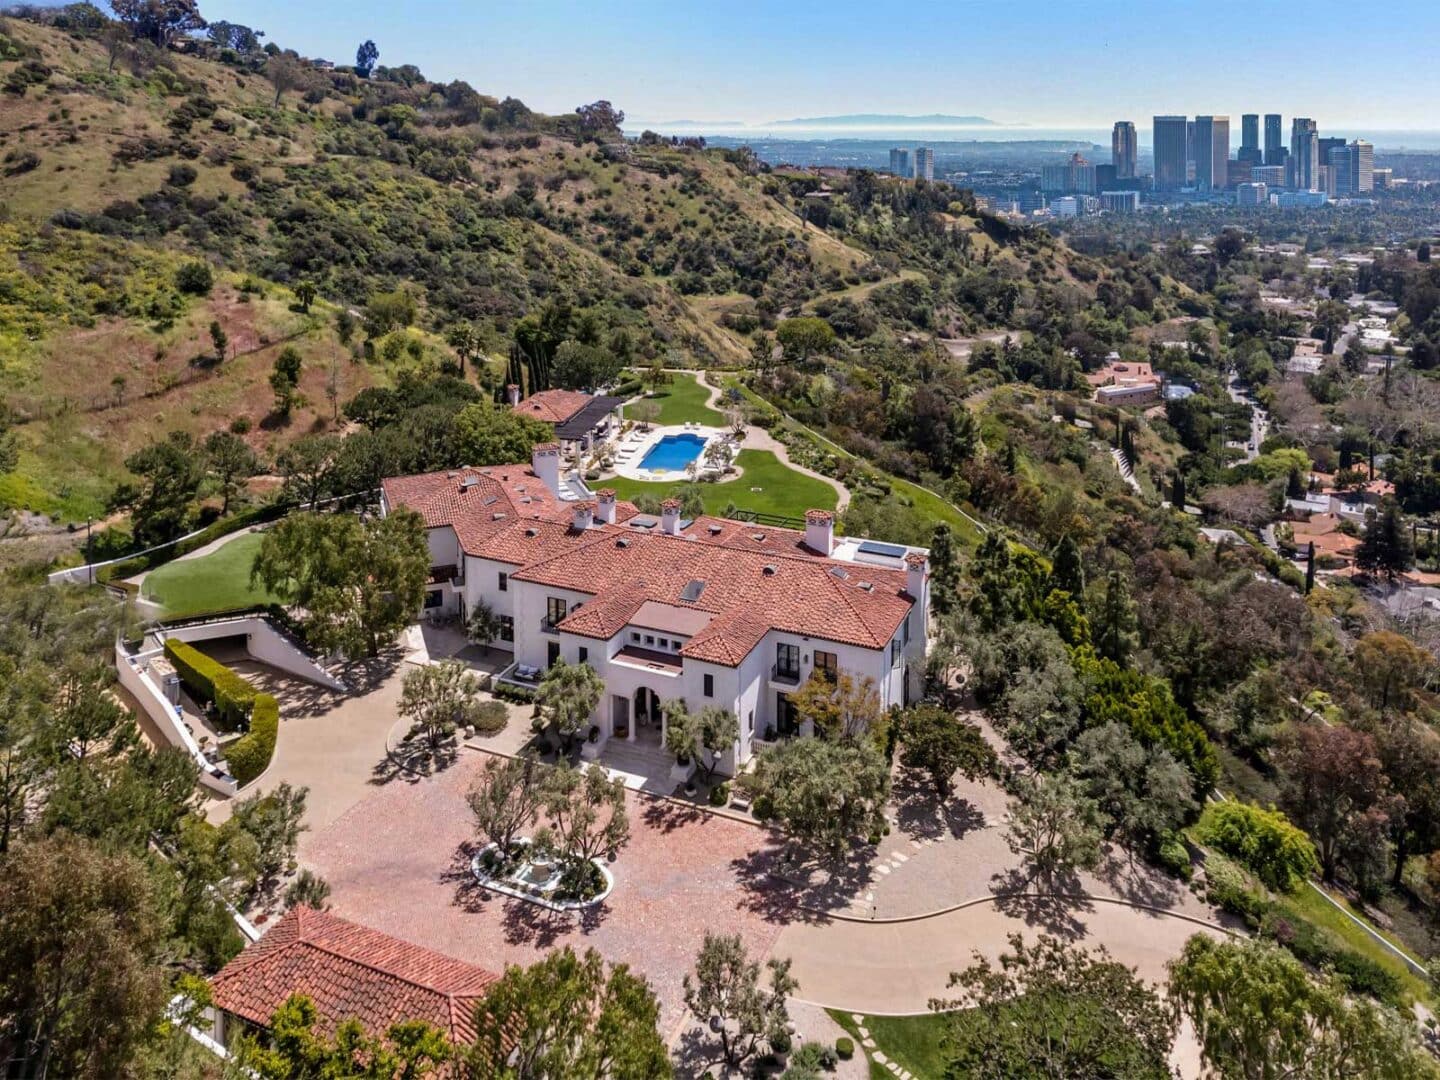 Drake’s Beverly Hills house for sale